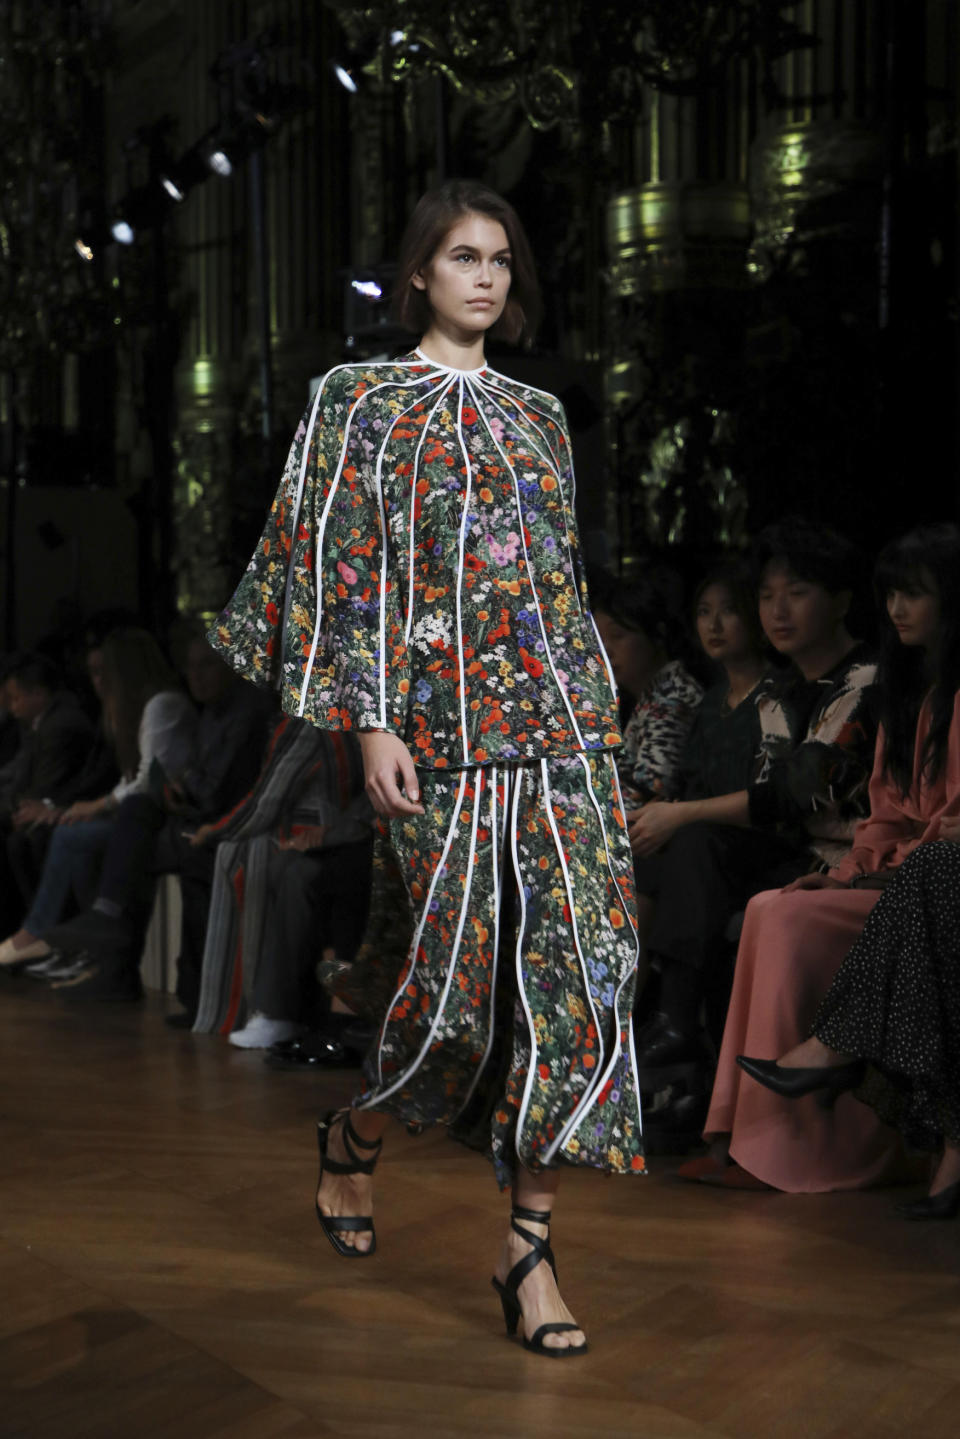 Model Kaia Gerber wears a creation as part of the Stella McCartney Ready To Wear Spring-Summer 2020 collection, unveiled during the fashion week, in Paris, Monday, Sept. 30, 2019. (Photo by Vianney Le Caer/Invision/AP)